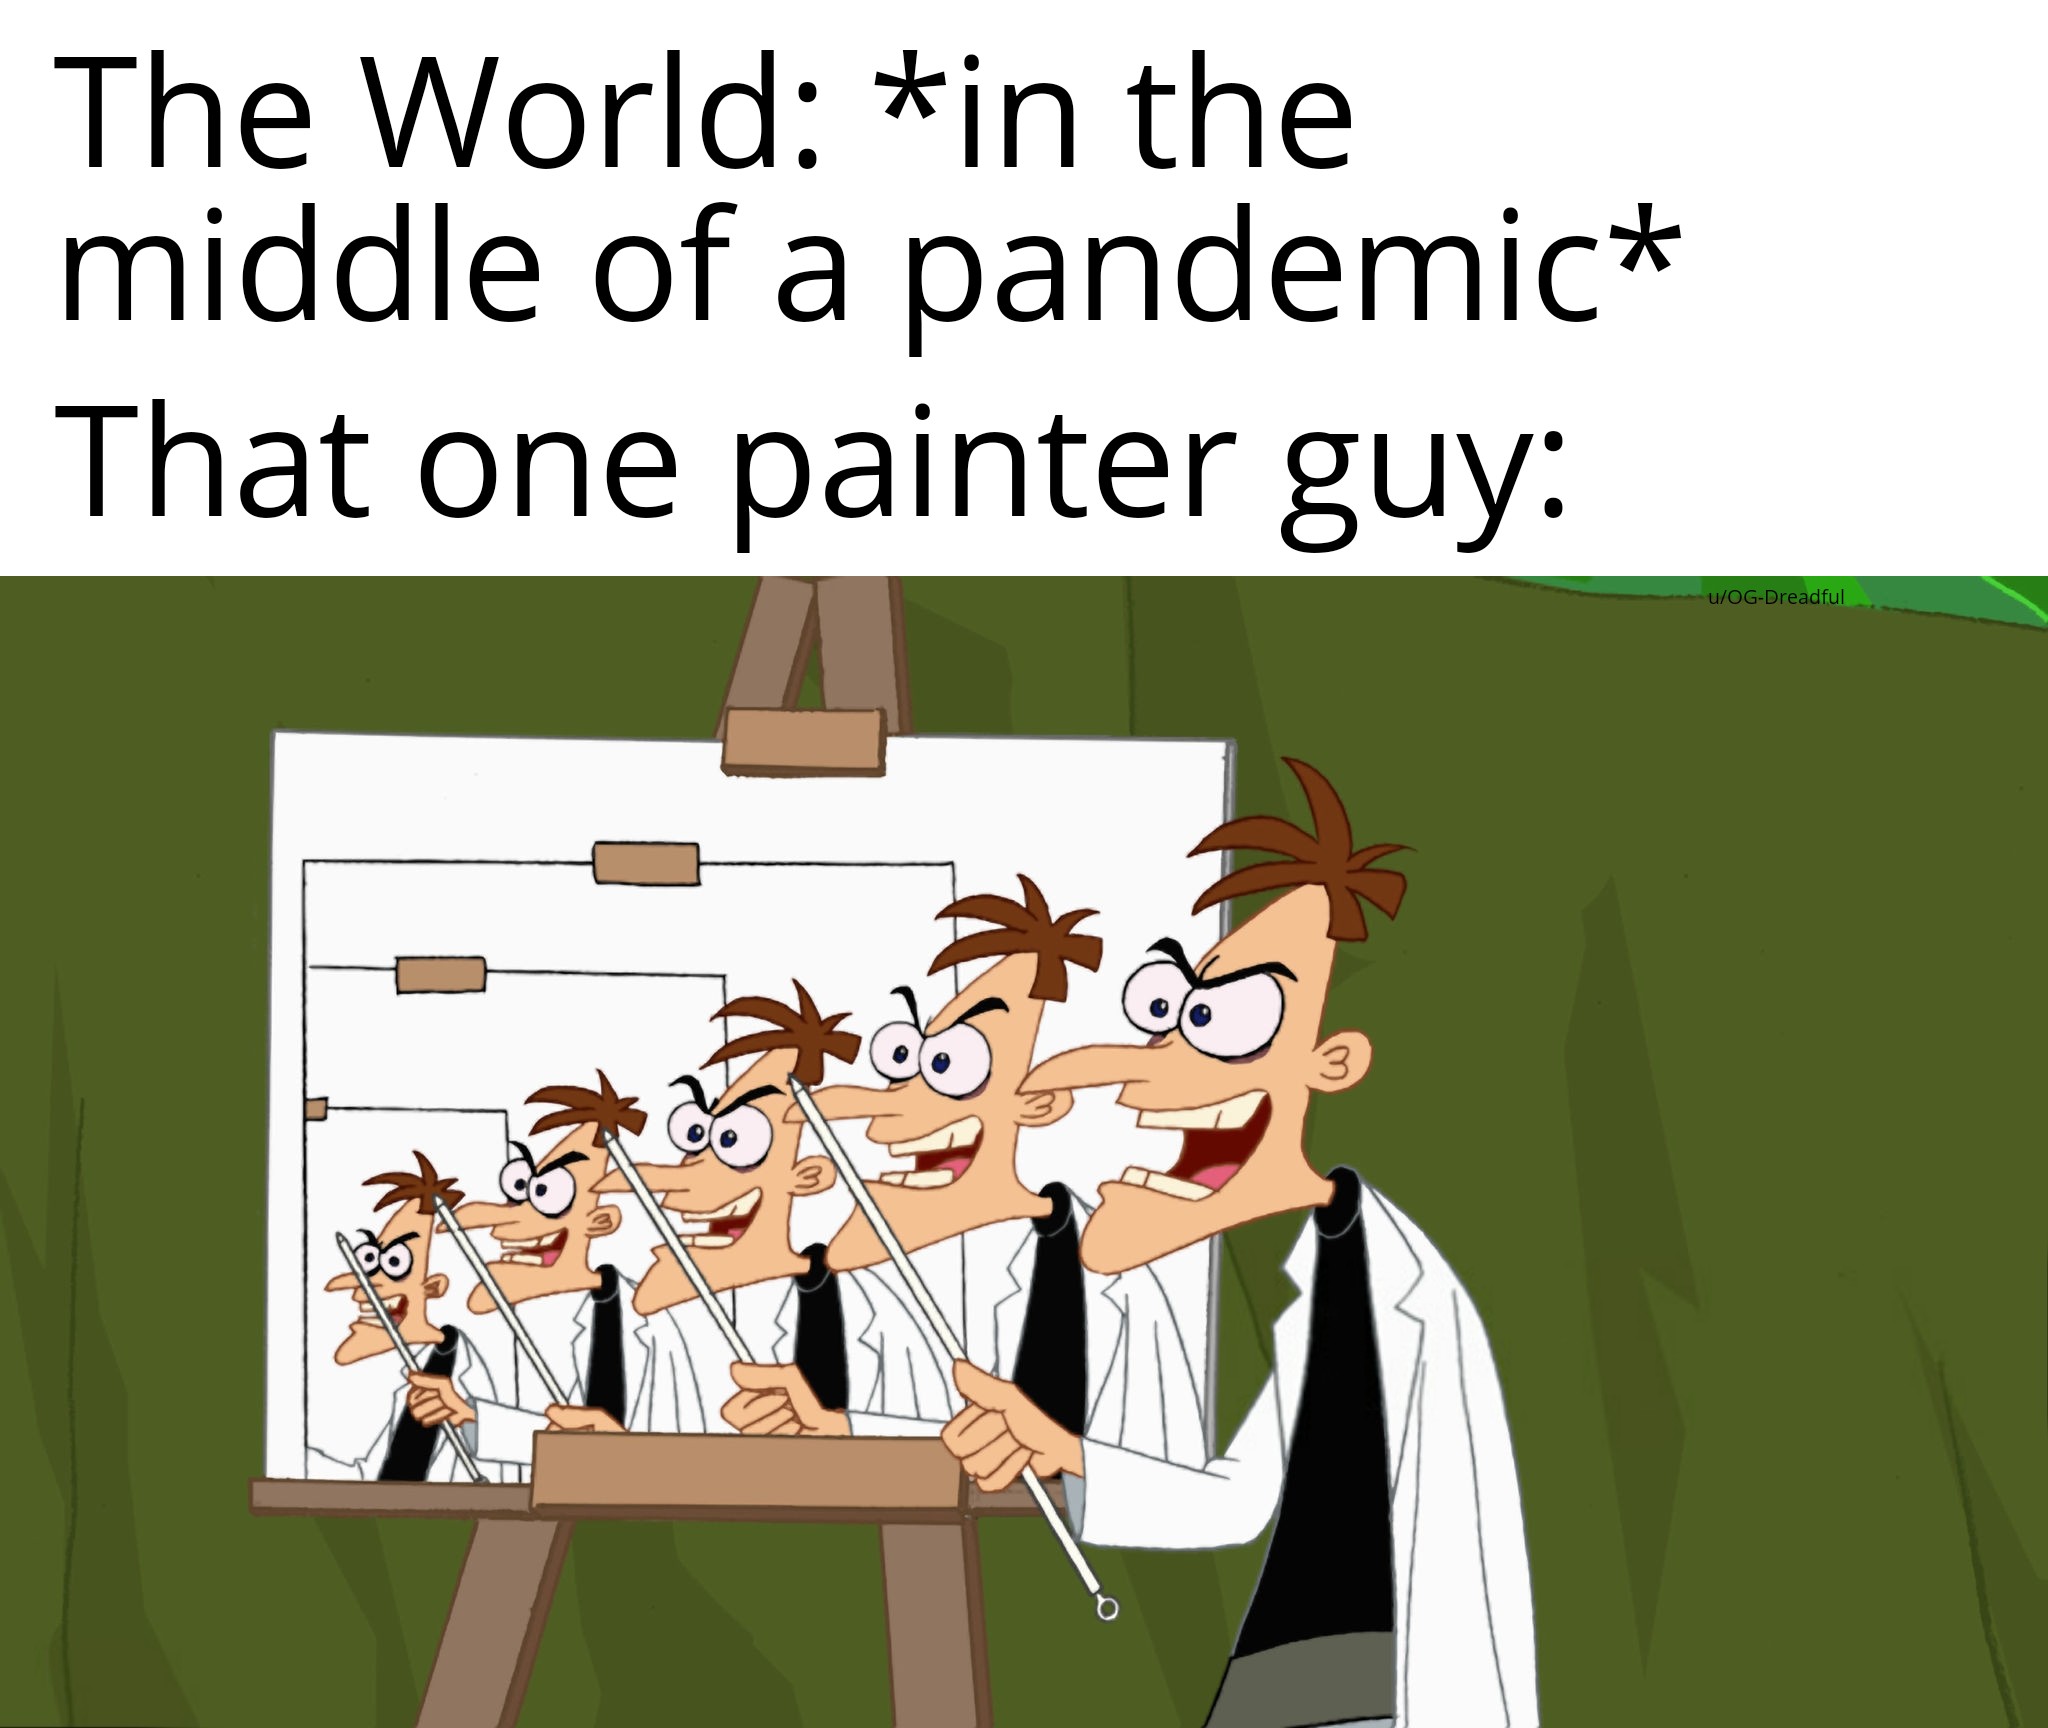 The World in the middle of a pandemic That one painter guy uOgDreadful